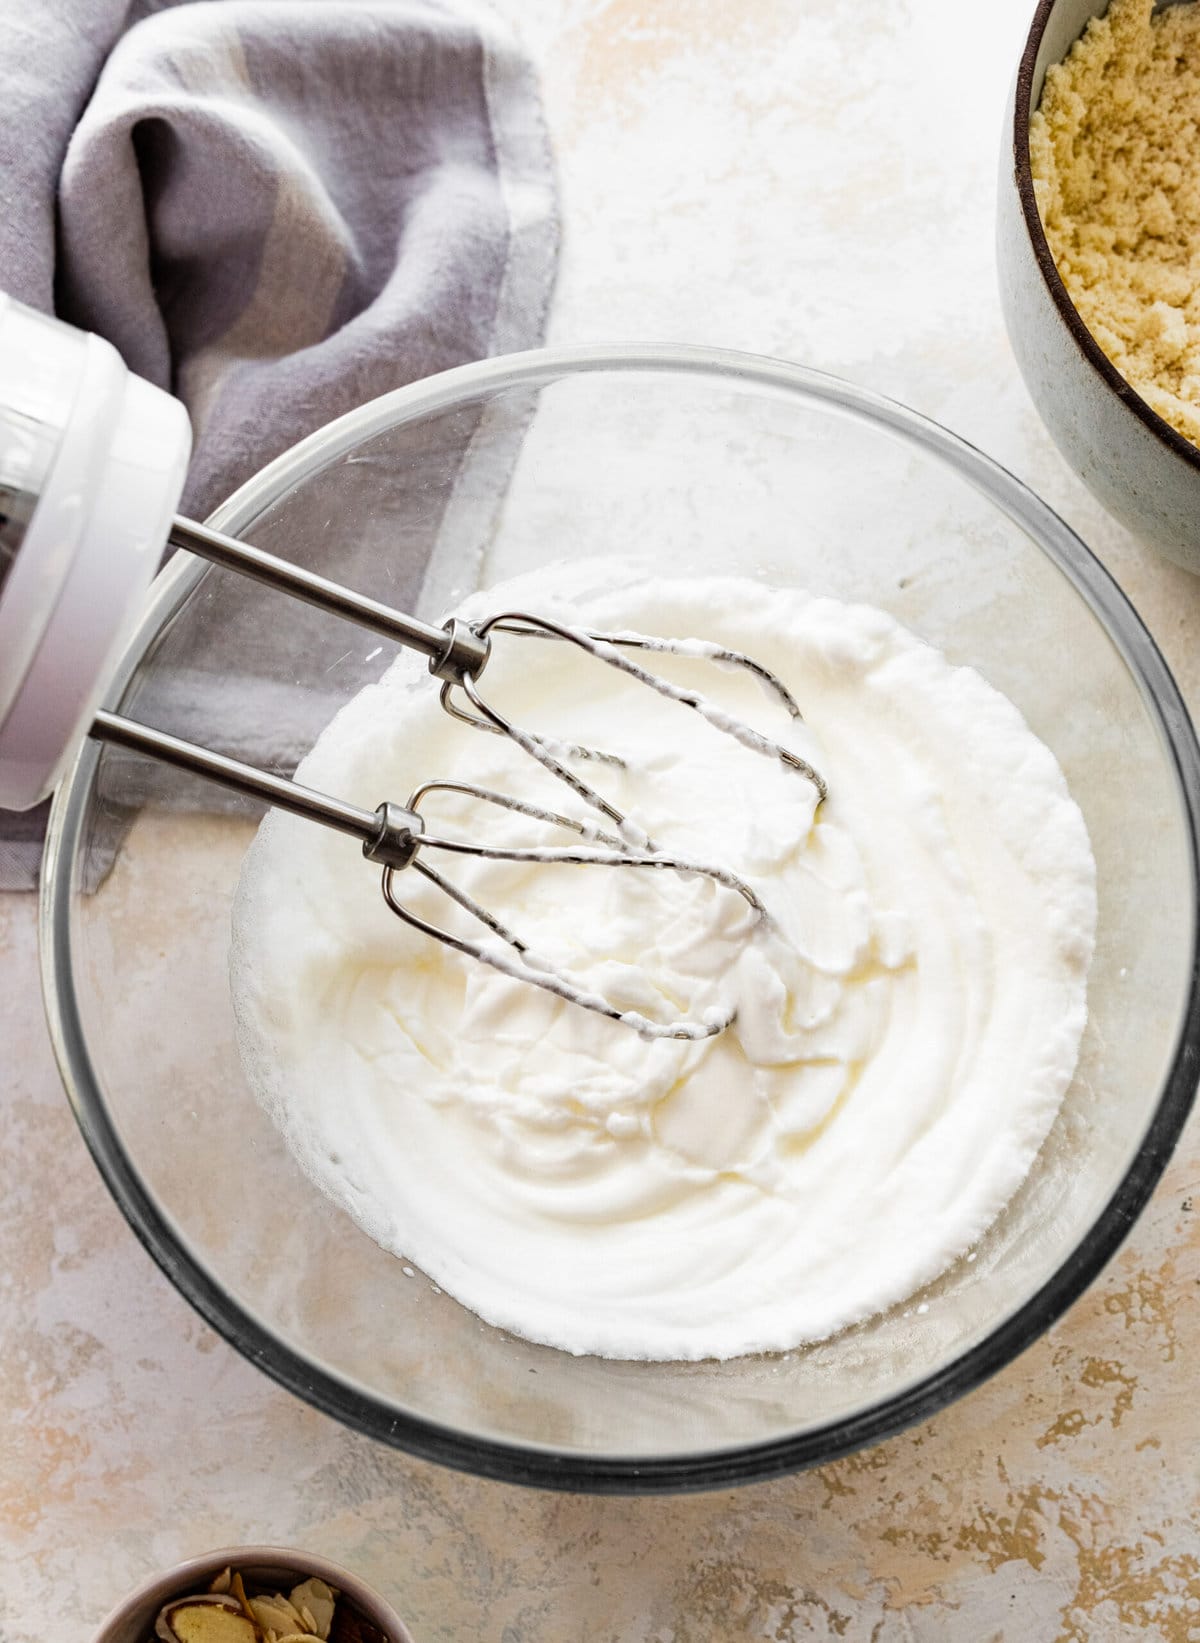 How to make easy almond cake recipe step by step: whipping the egg whites.